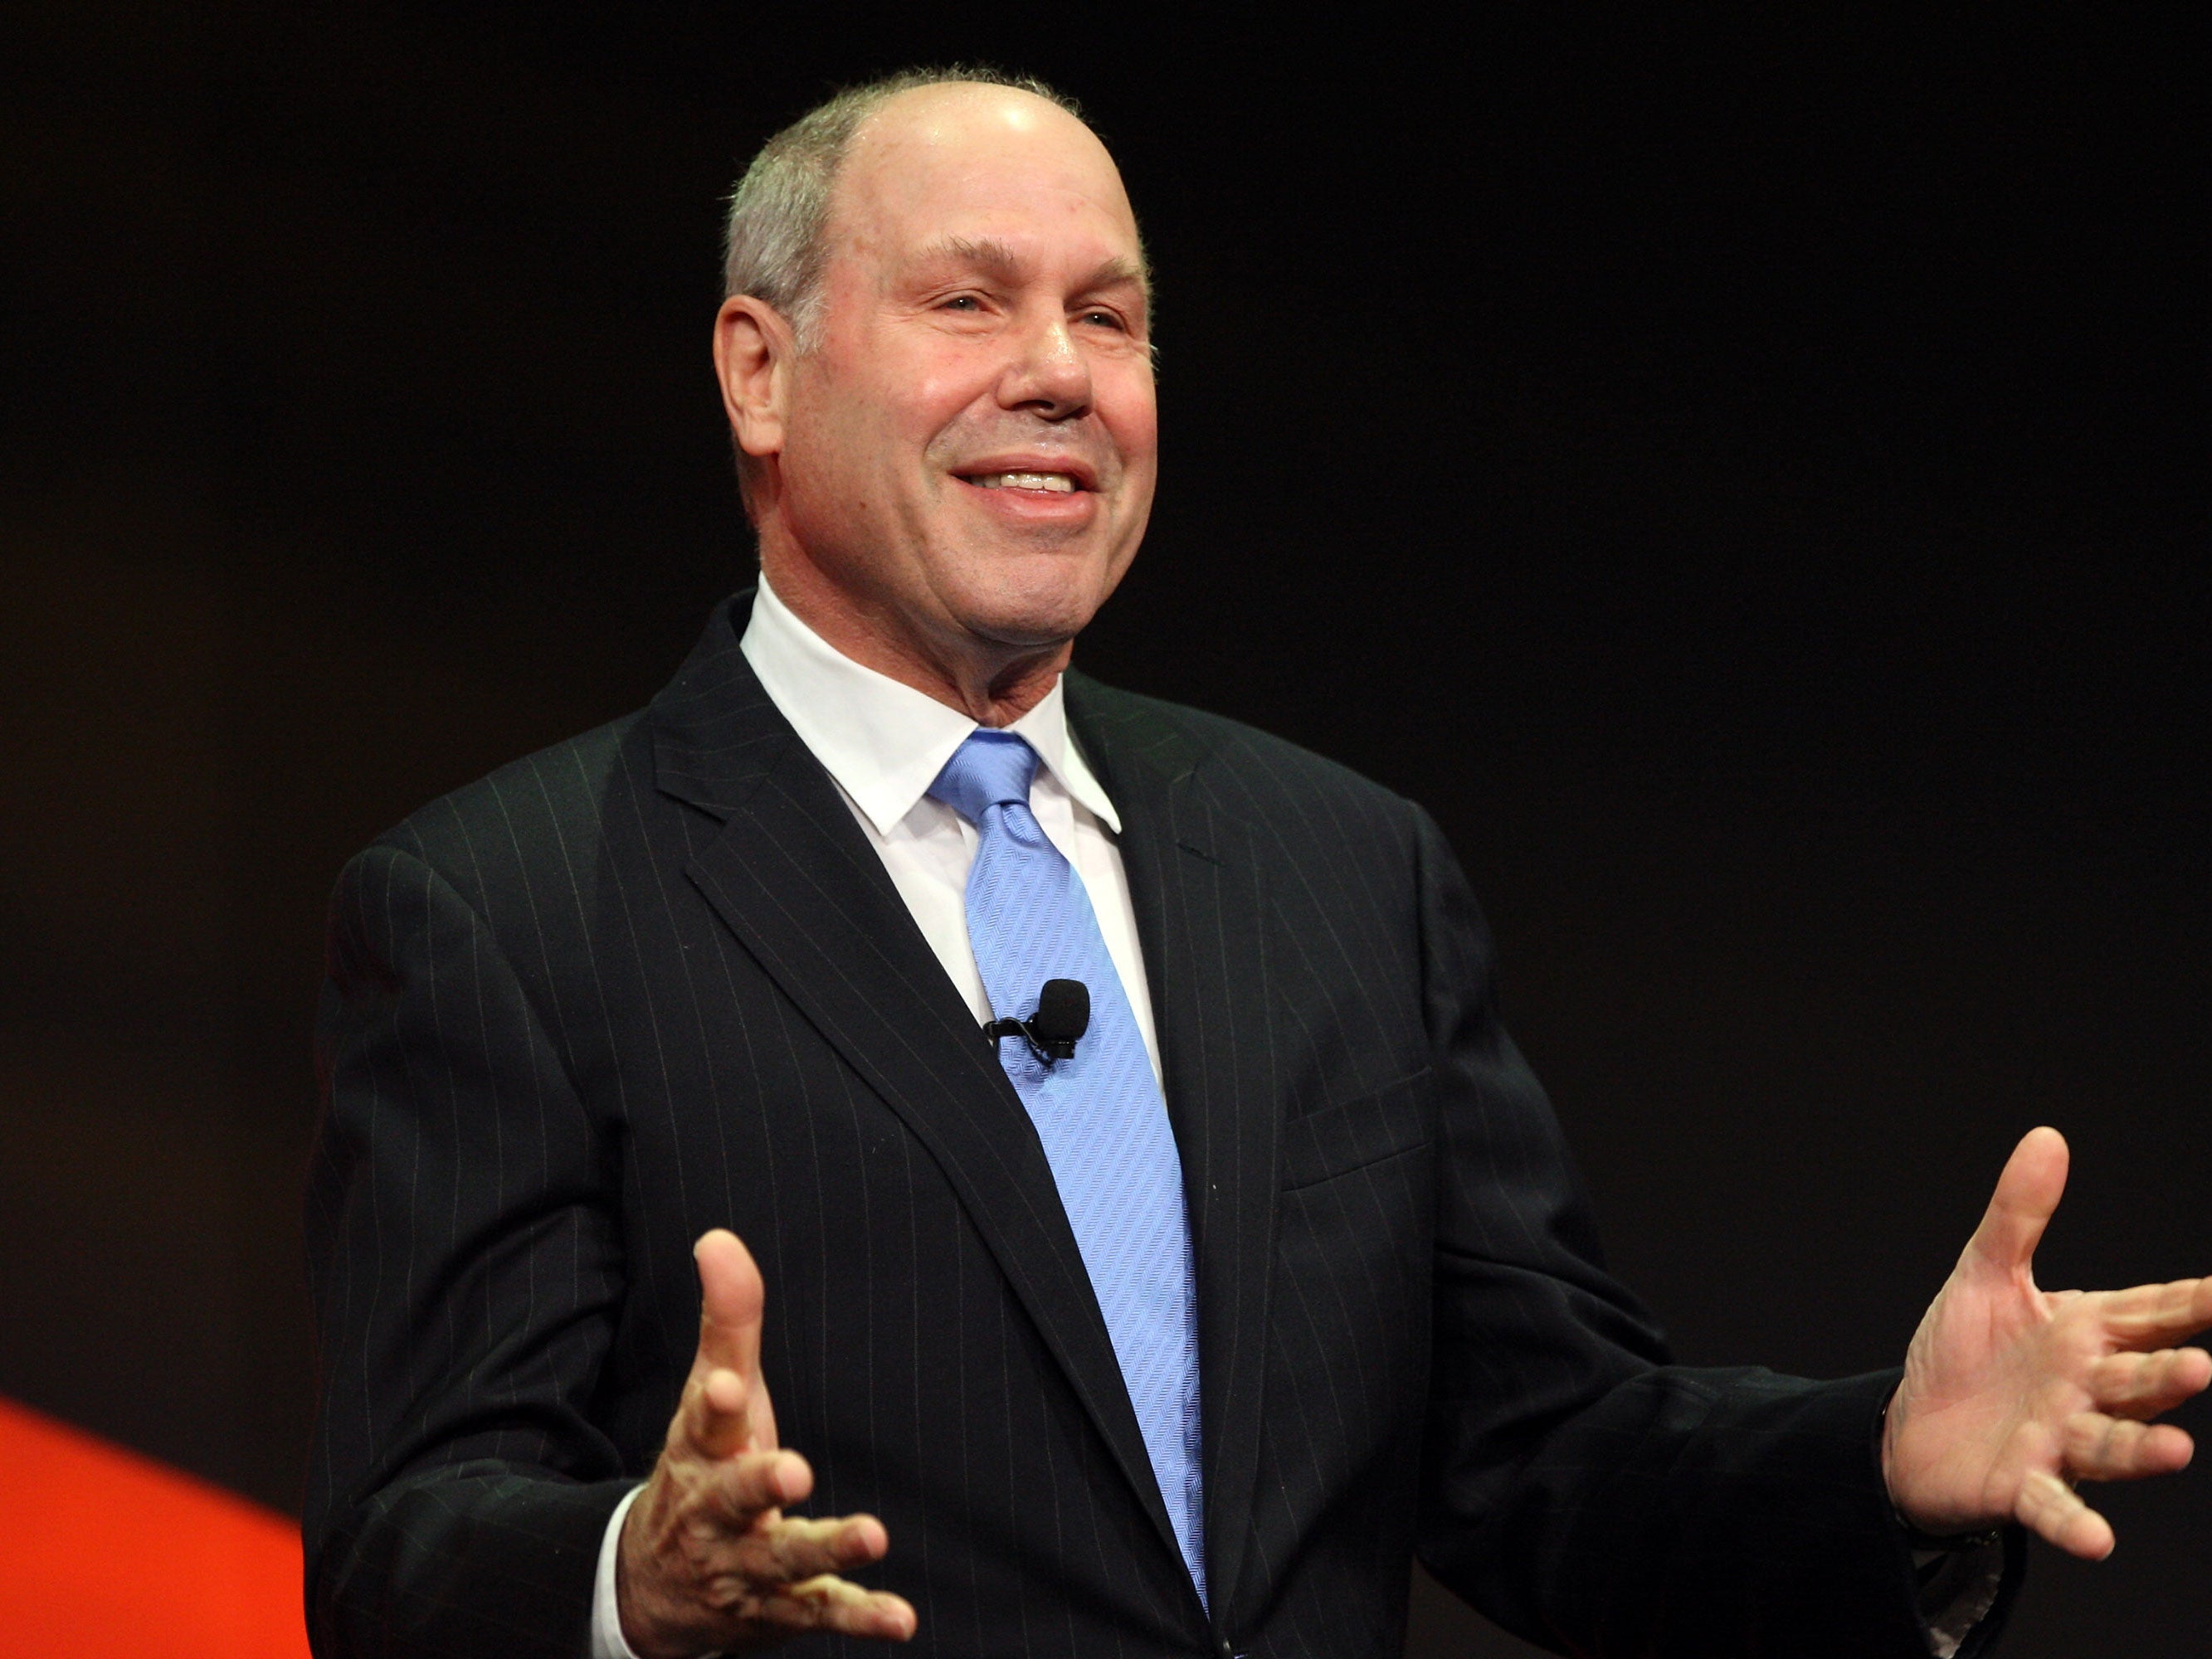 Michael Eisner made the comments while speaking at the Aspen Ideas Festival in Colorado.